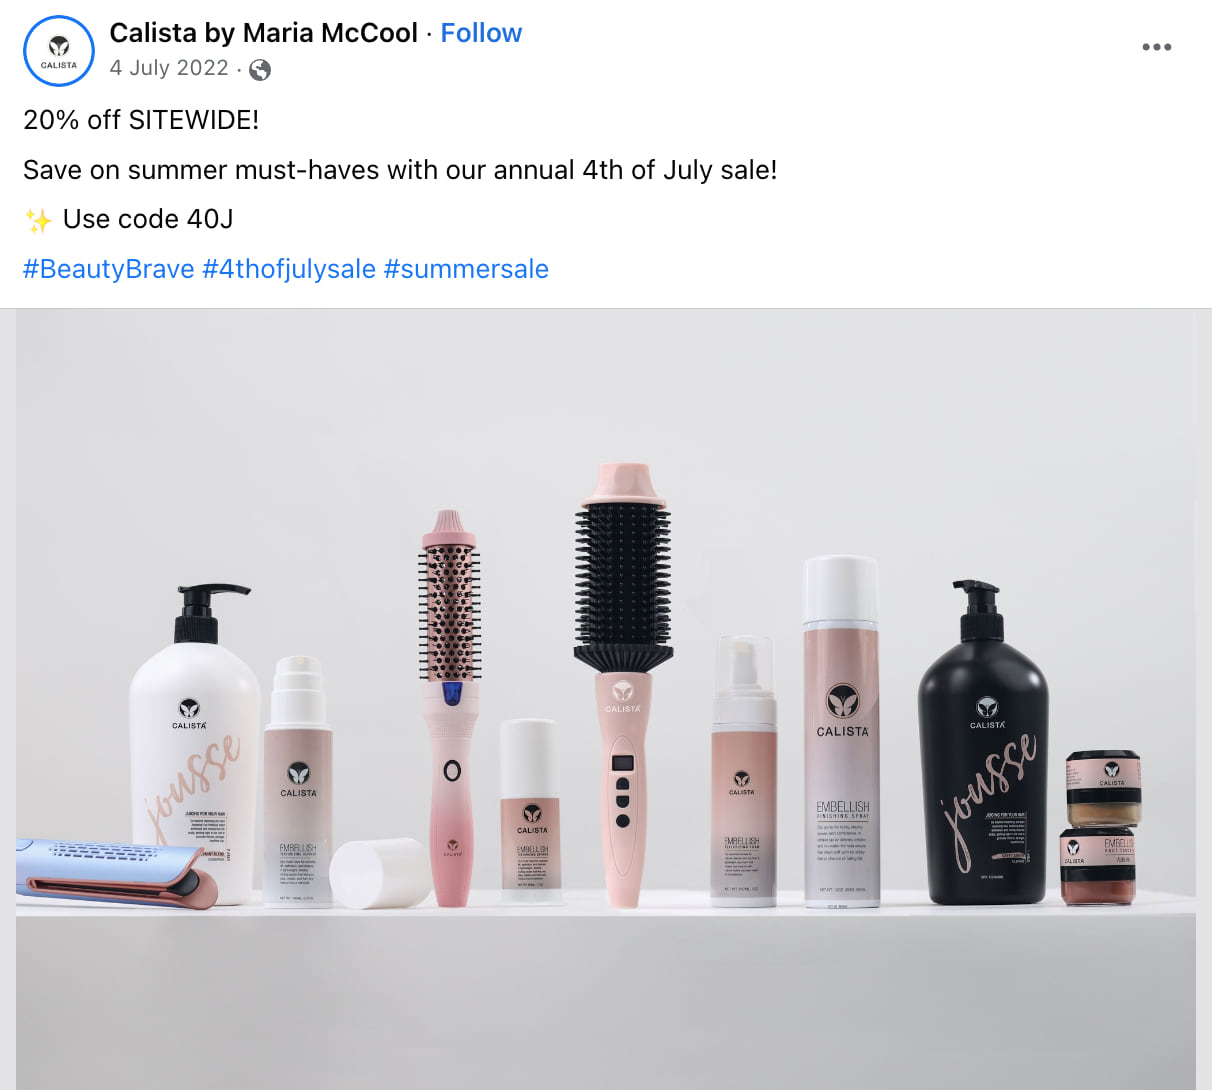 How To Use Calista Tools Discount Code?